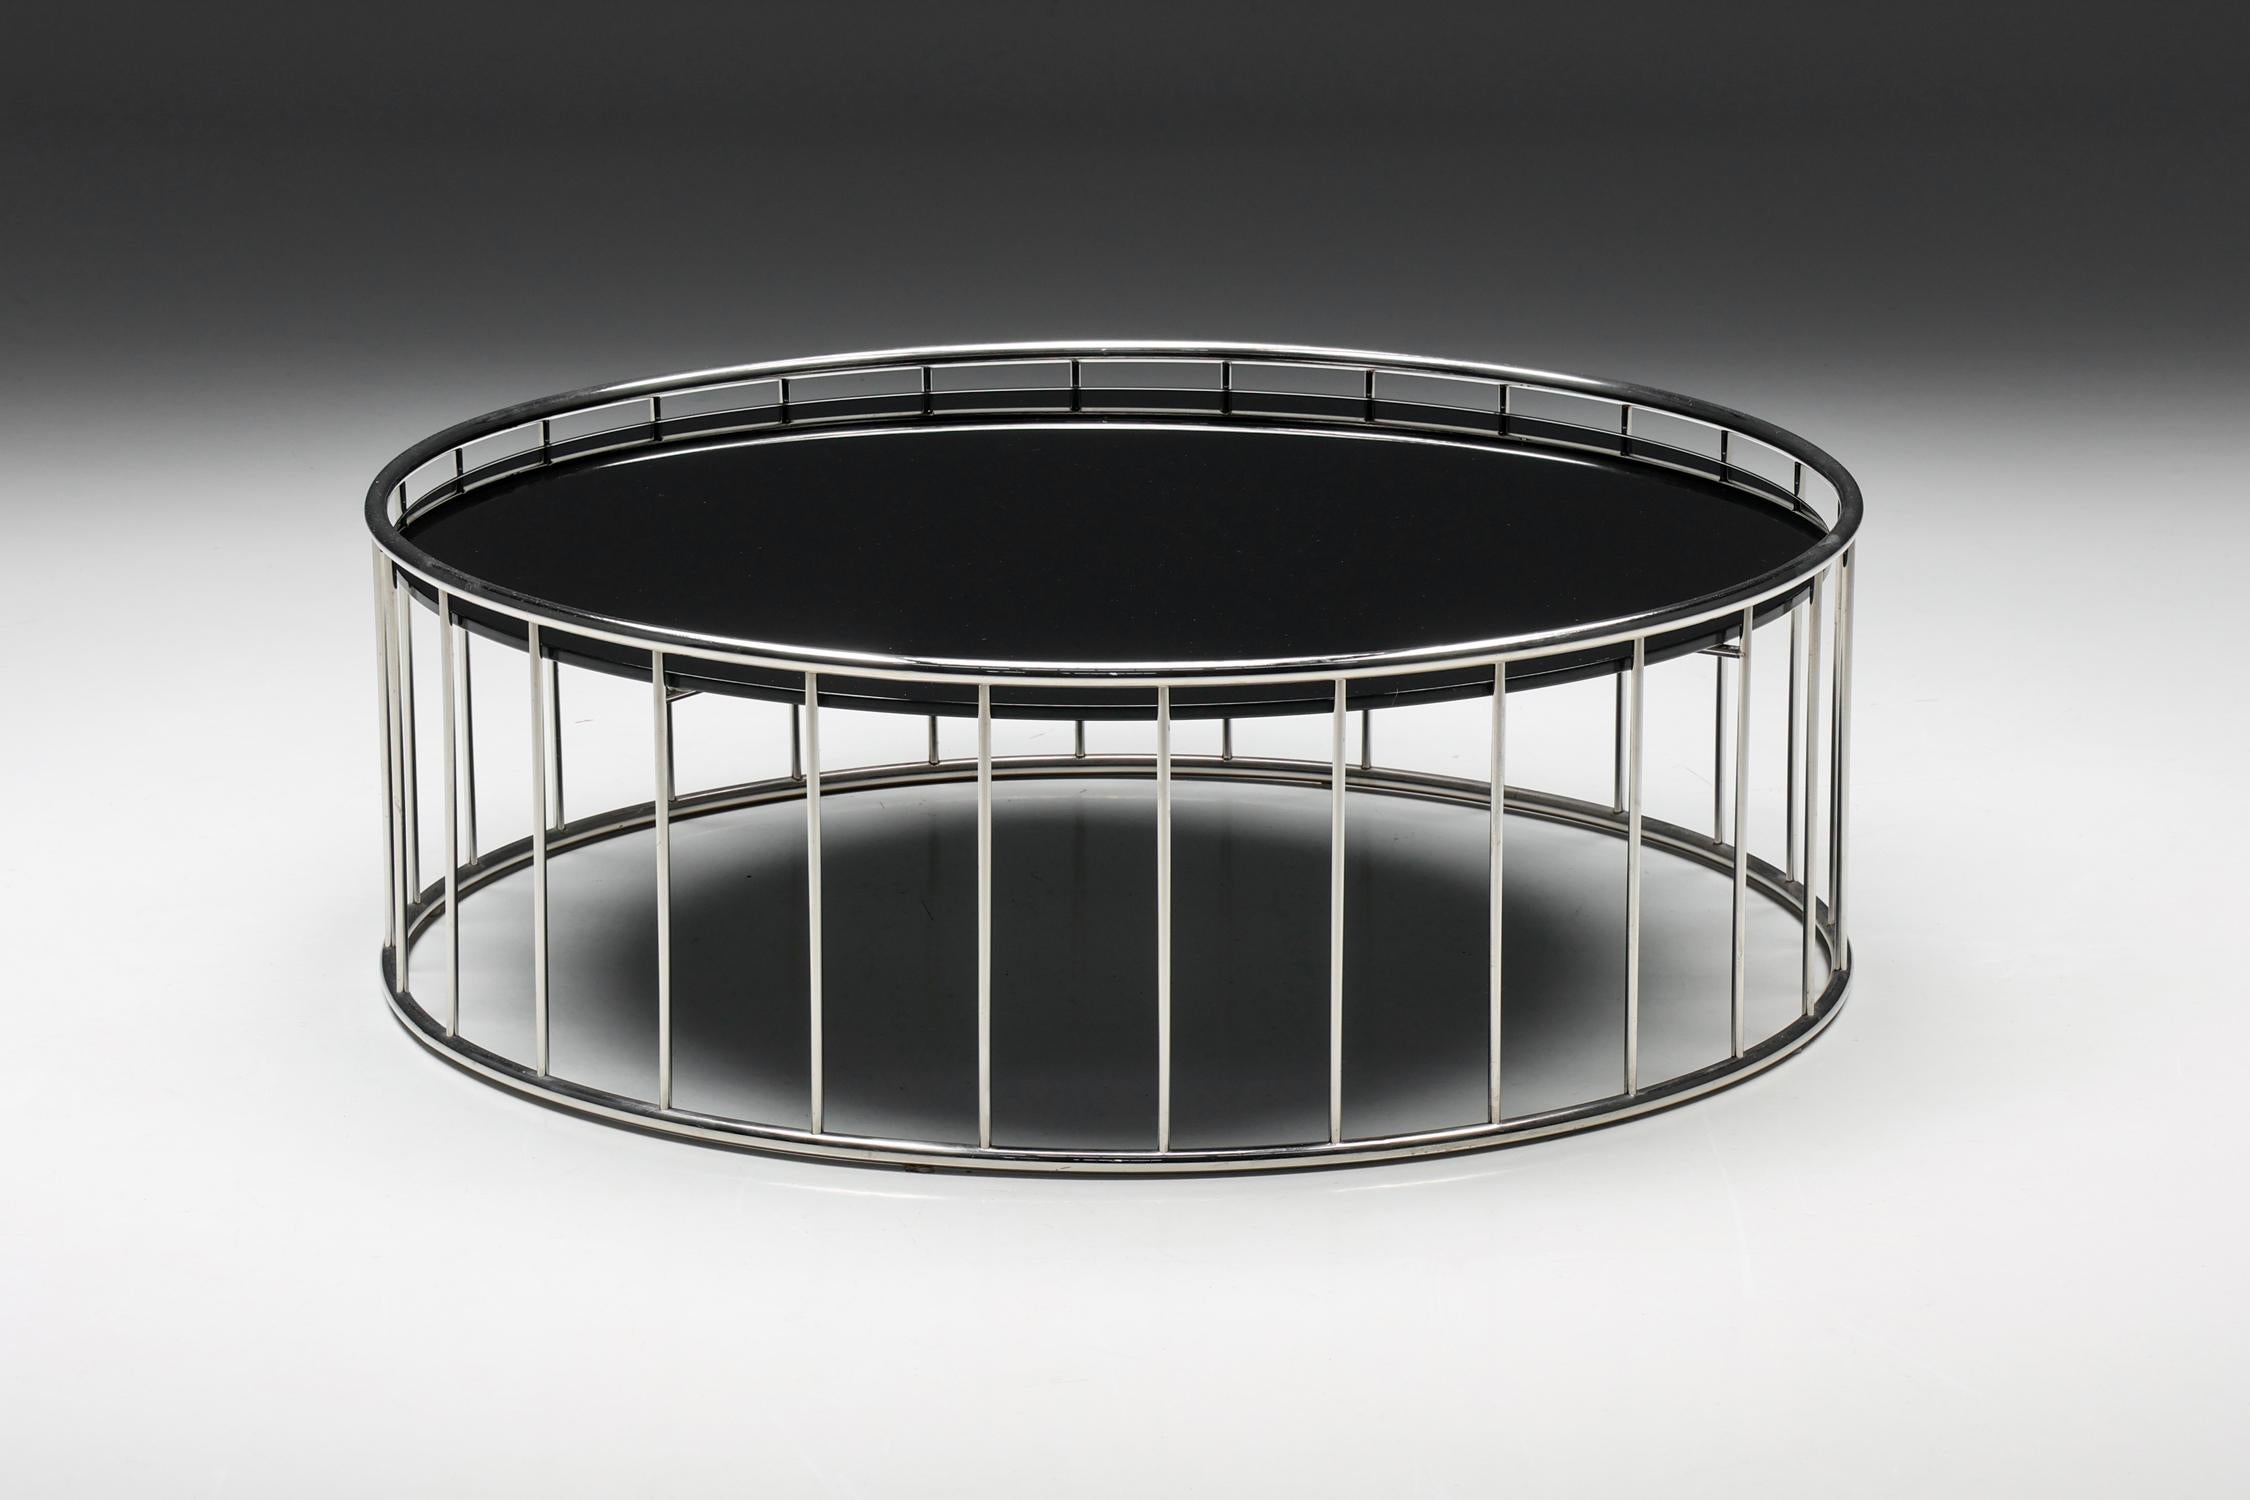 Caulfield coffee table by Rodolfo Dordoni for Minotti, Italy, 2003

This round coffee table, created by Rodolfo Dordoni for Minotti in 2003, is made of a metal frame and a glass surface. A series of columns support the glass top. The metal frame